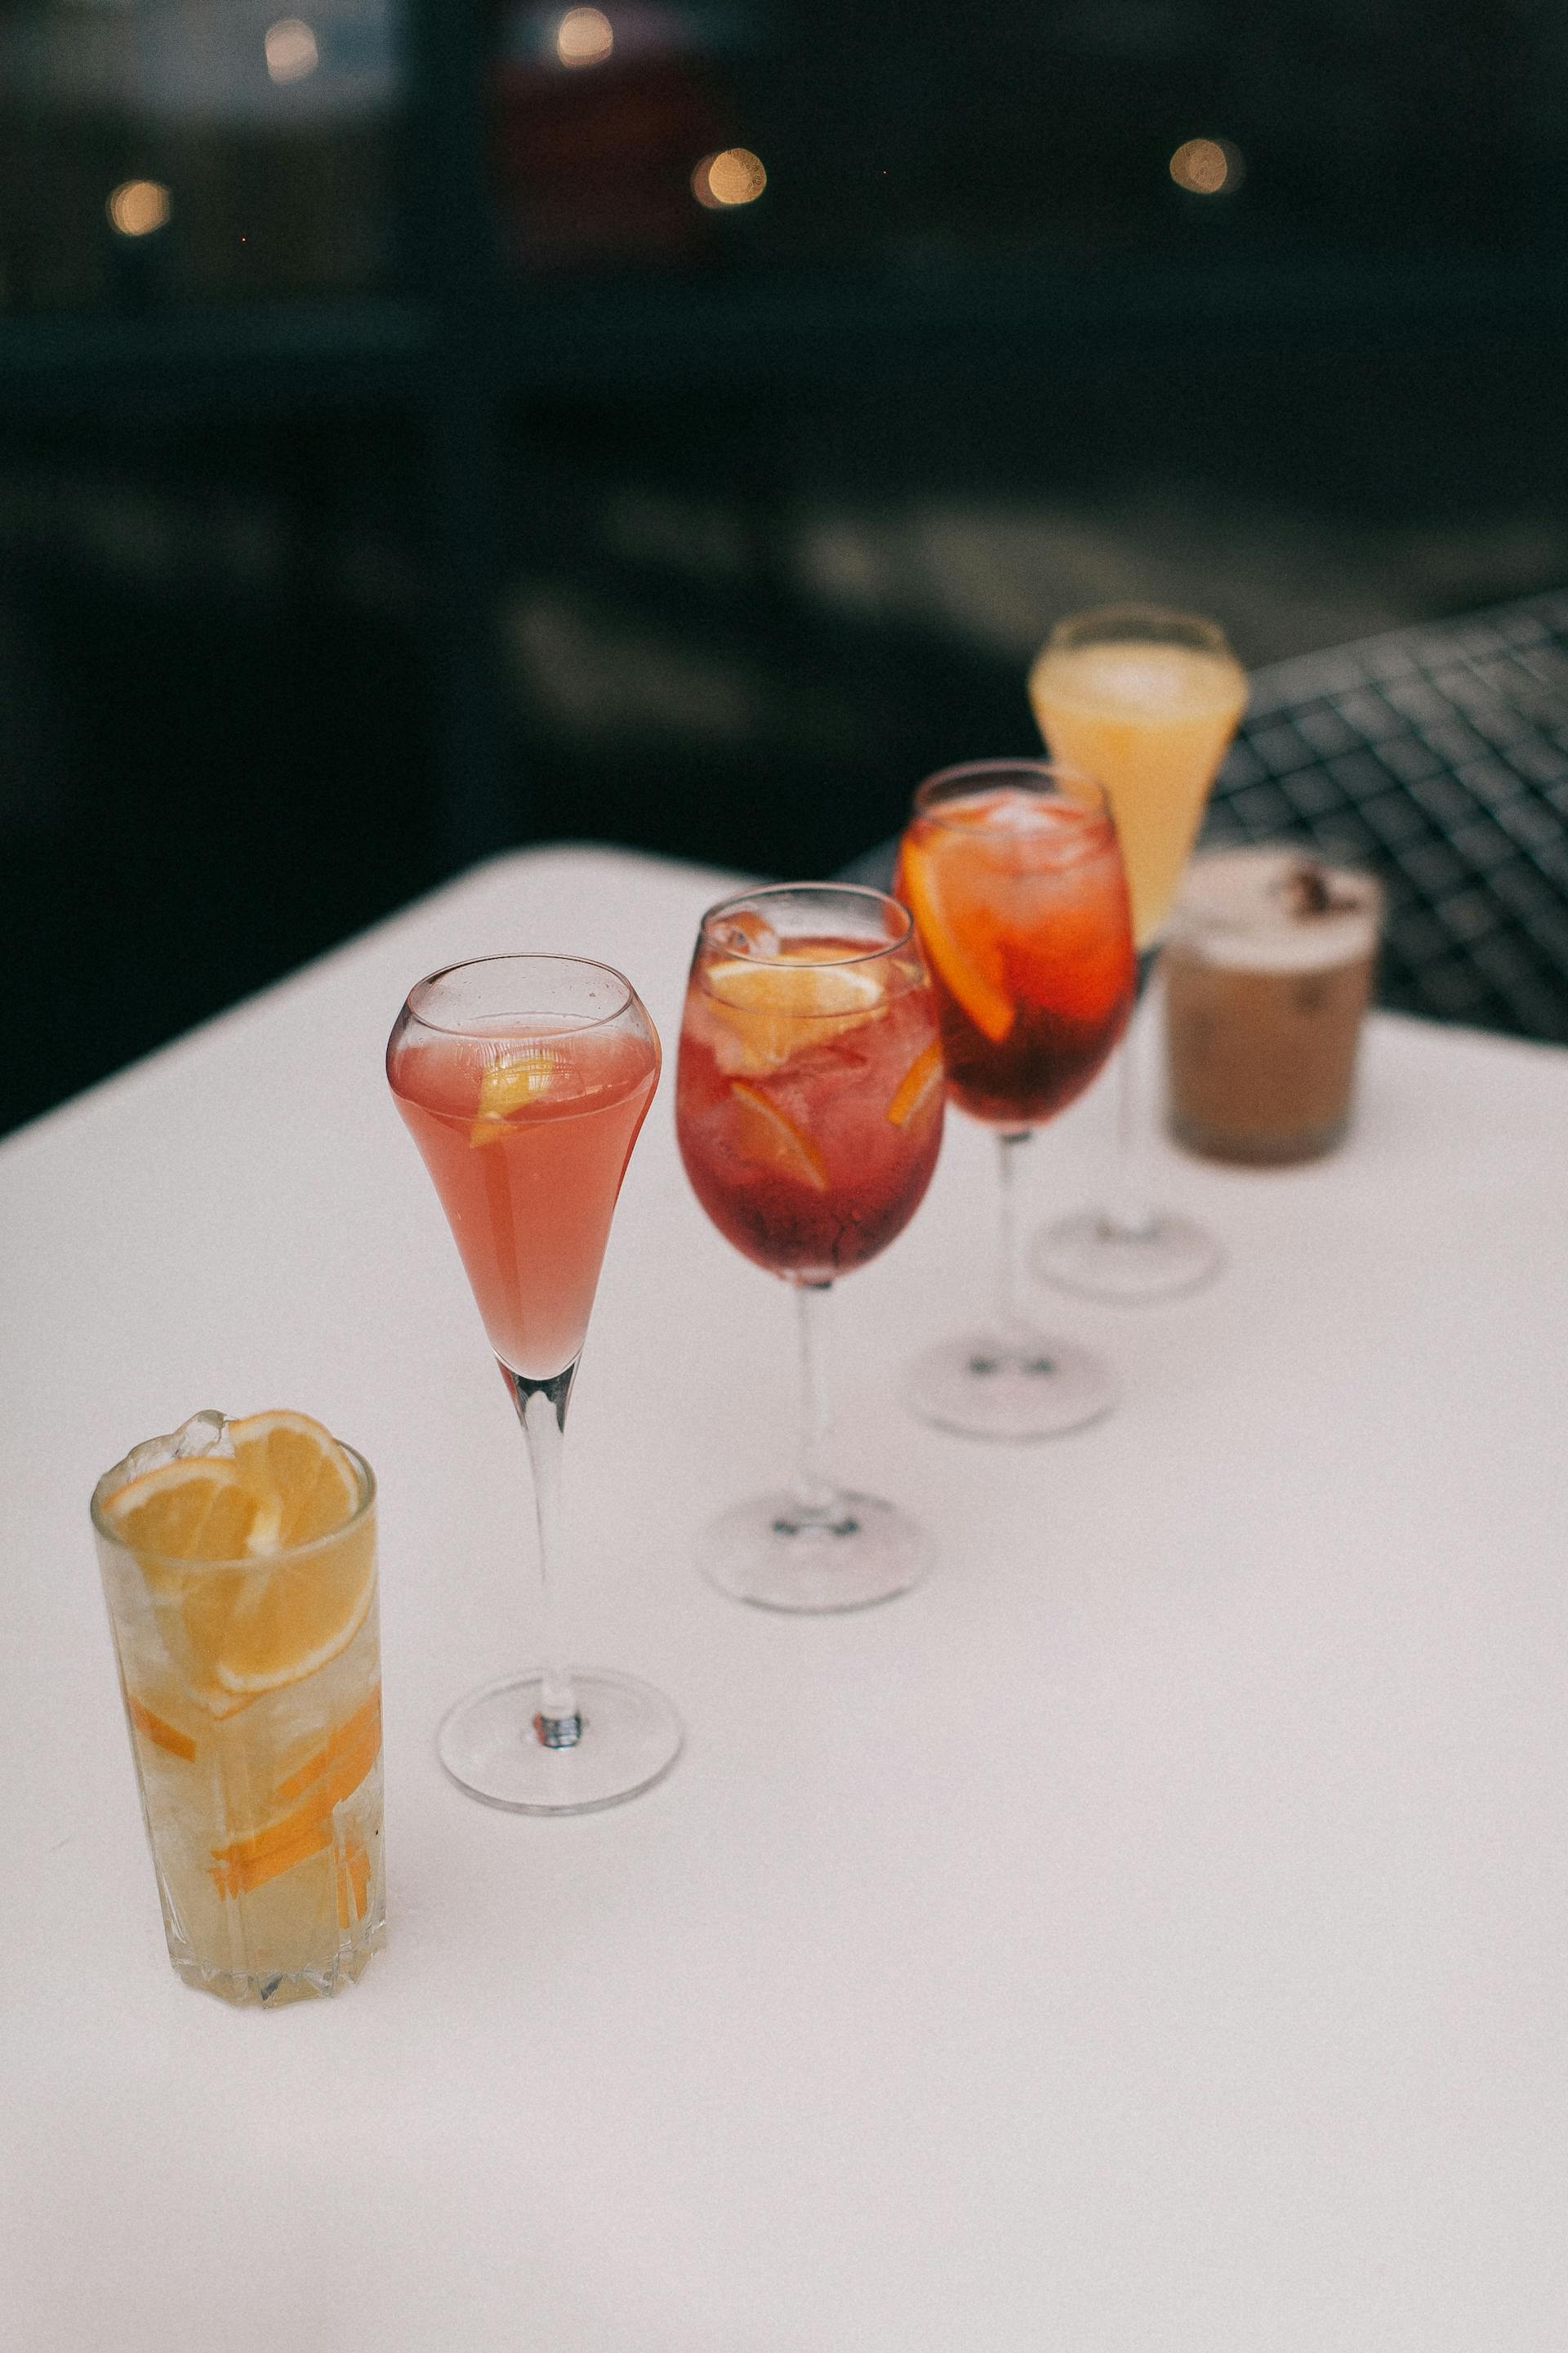 A row of cocktails | Source: Pexels